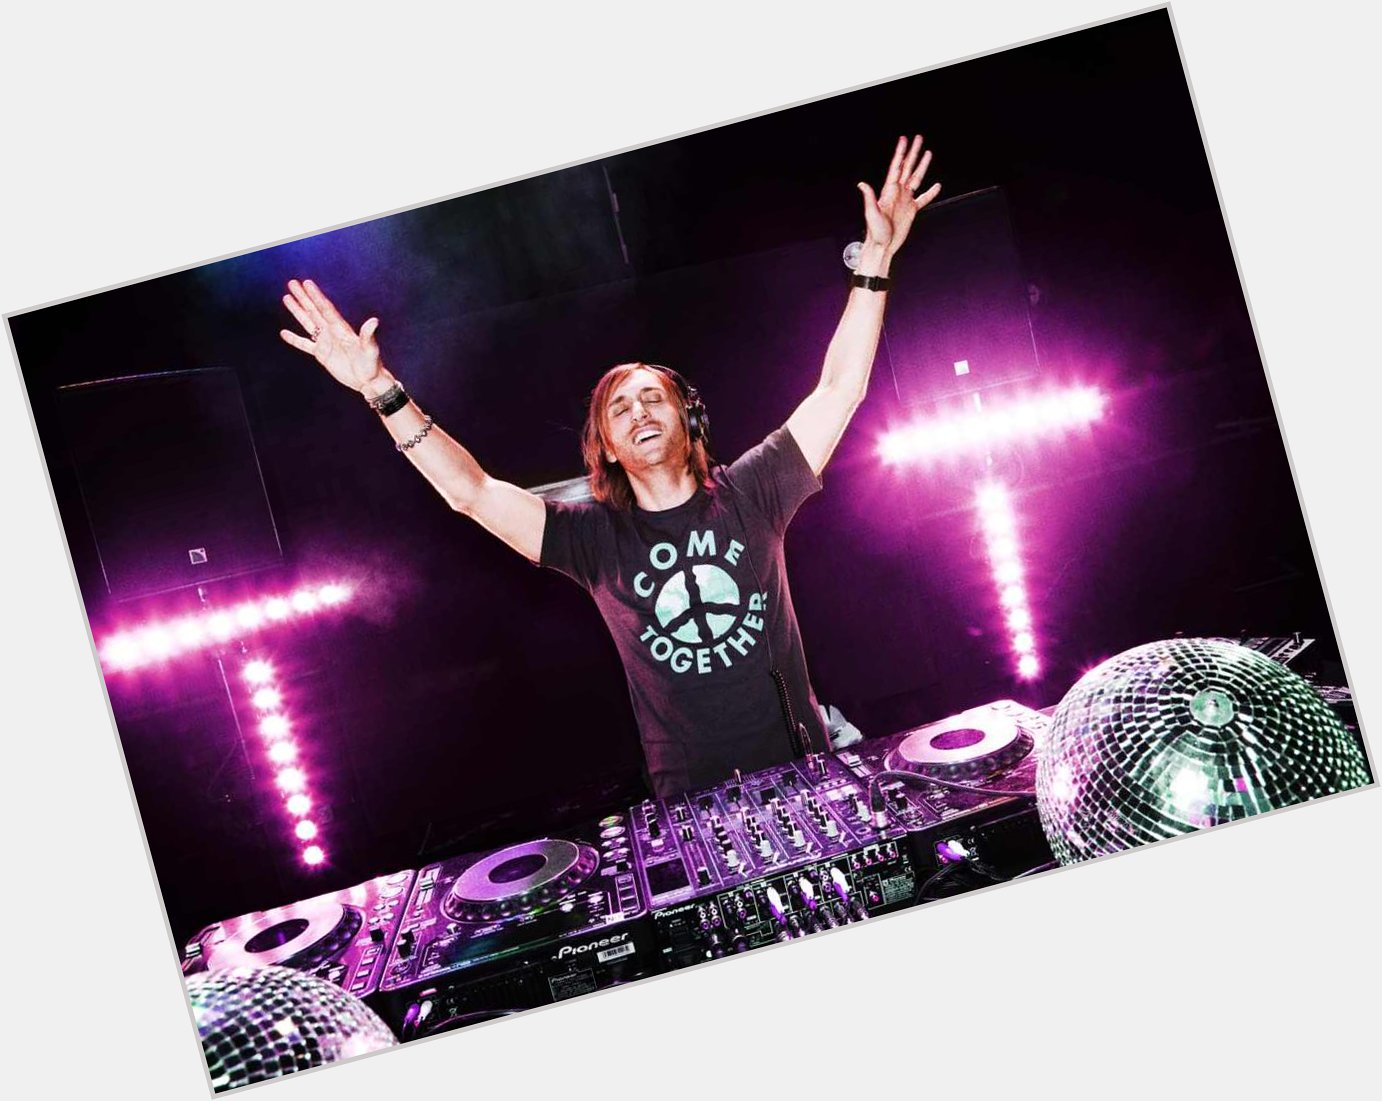 Happy Birthday David Guetta! Celebrate with all his greatest music here:  